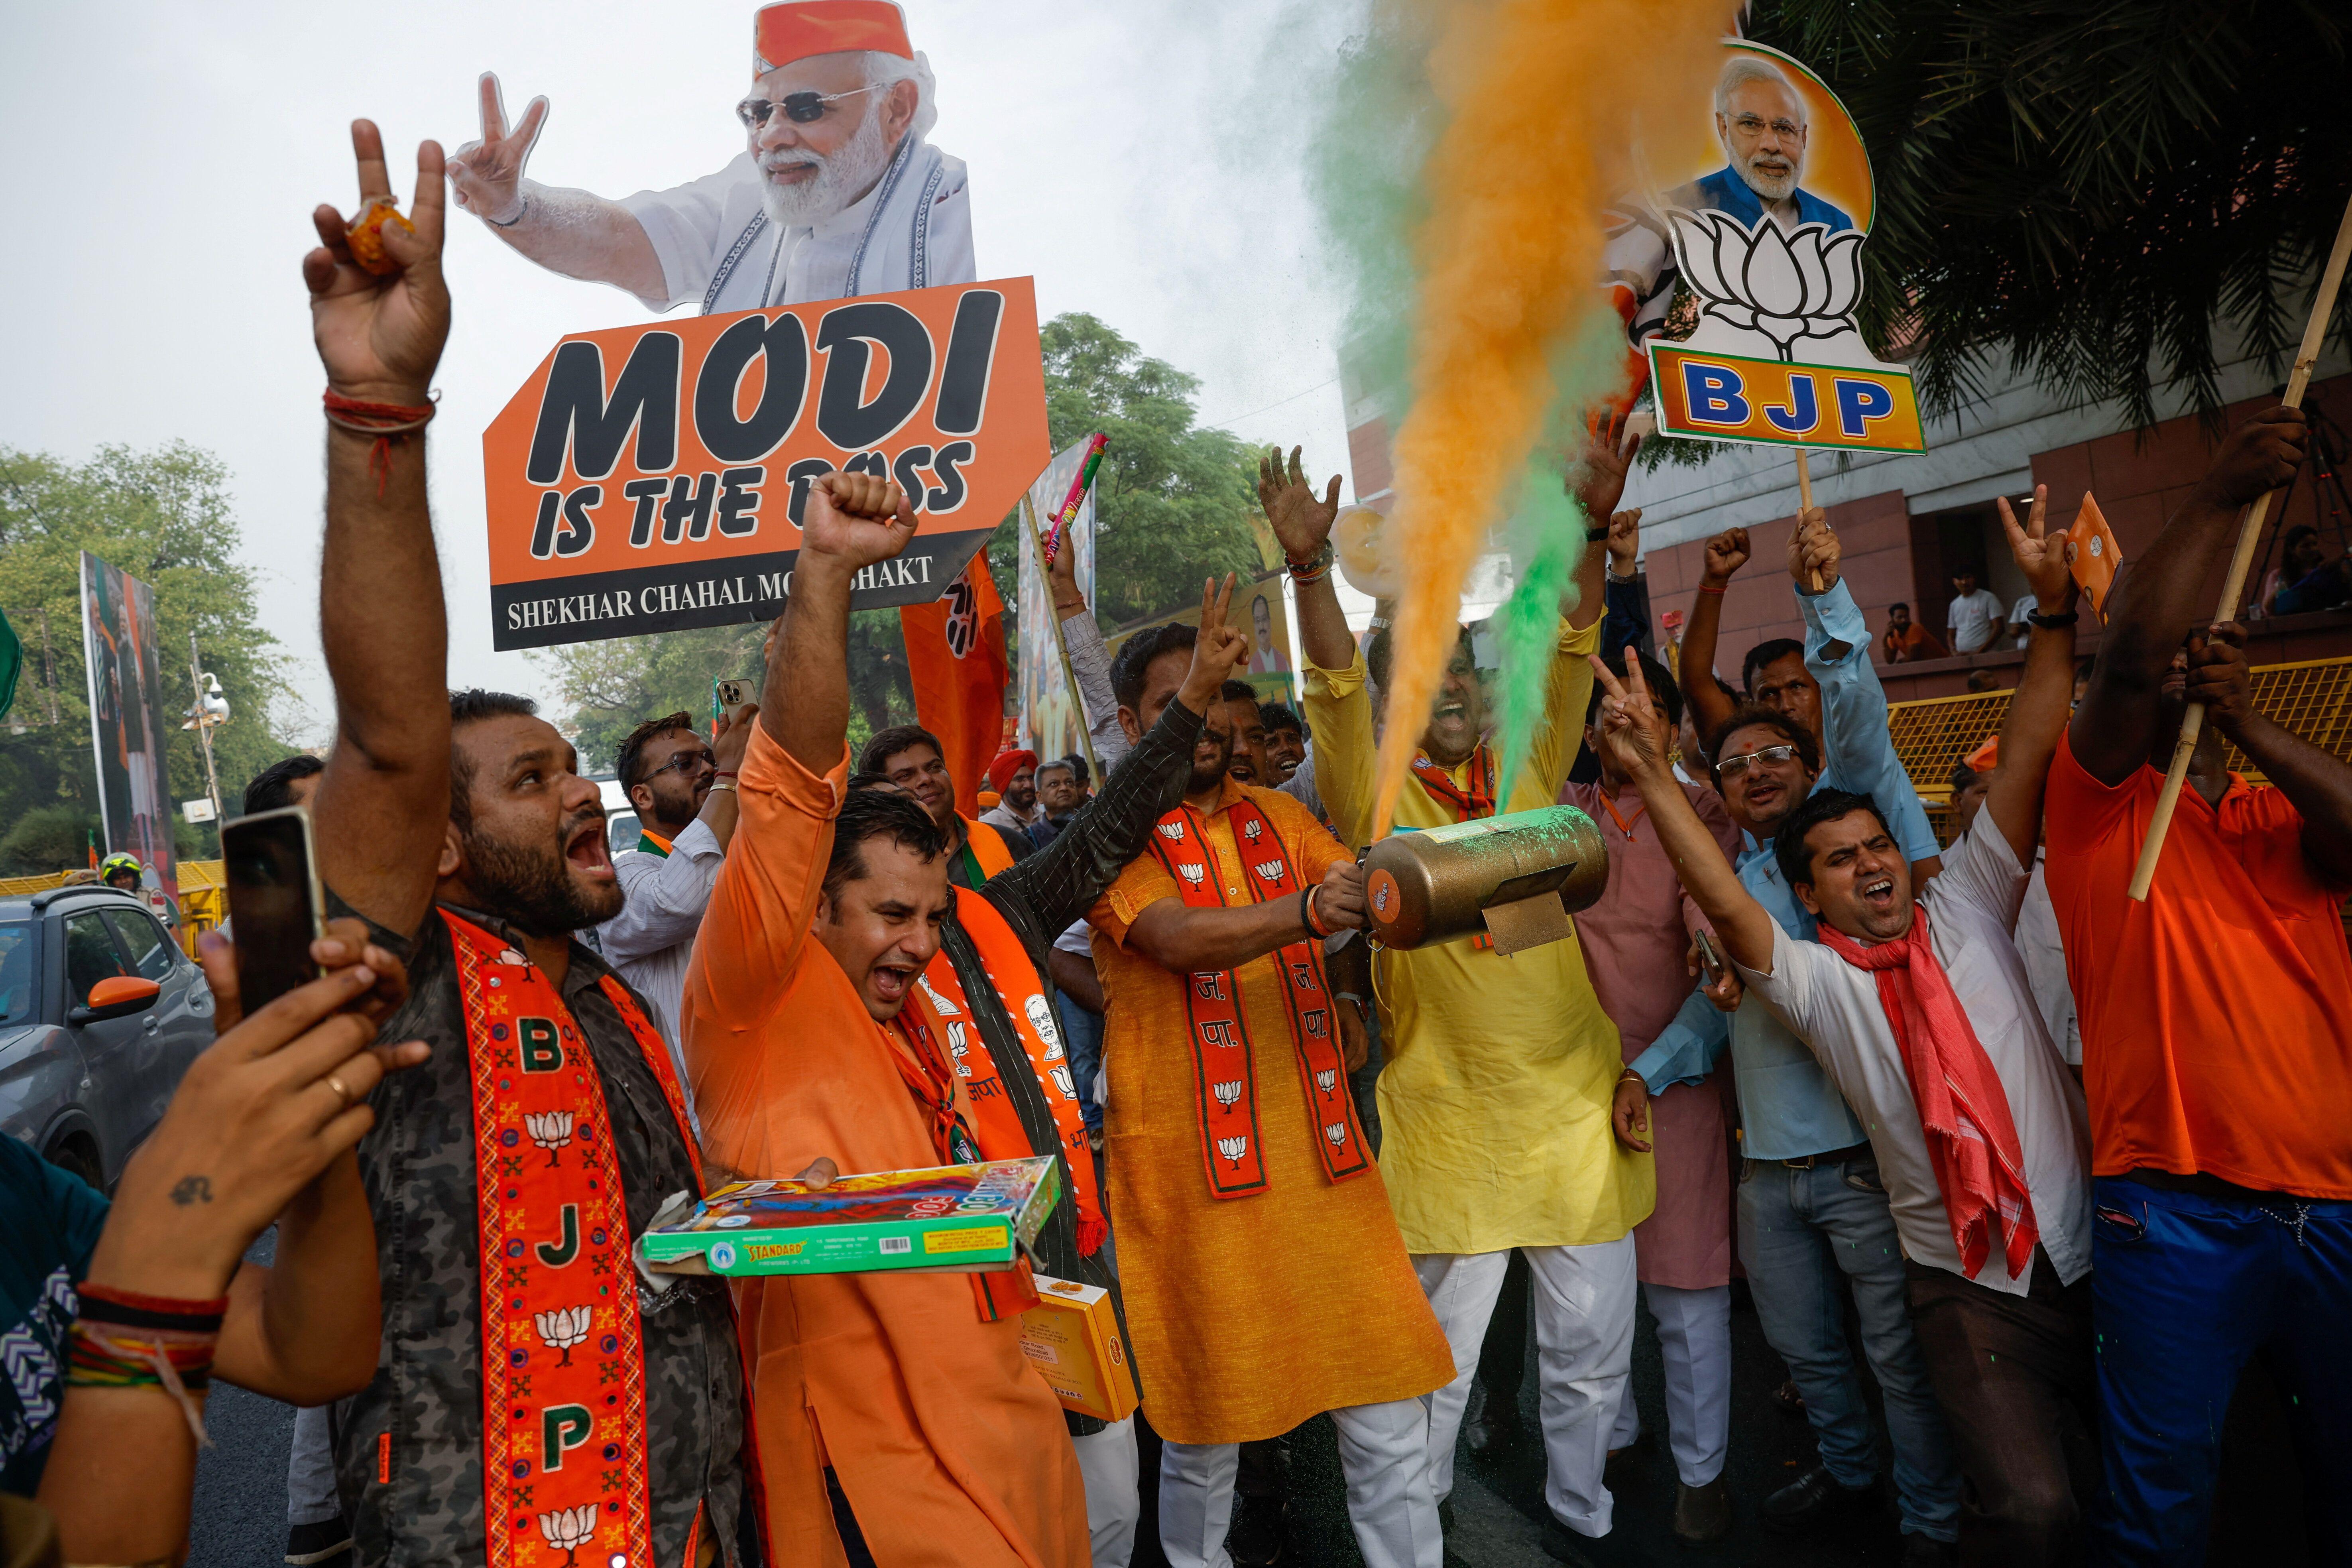 BBC India reporters on why some voters said no to Modi